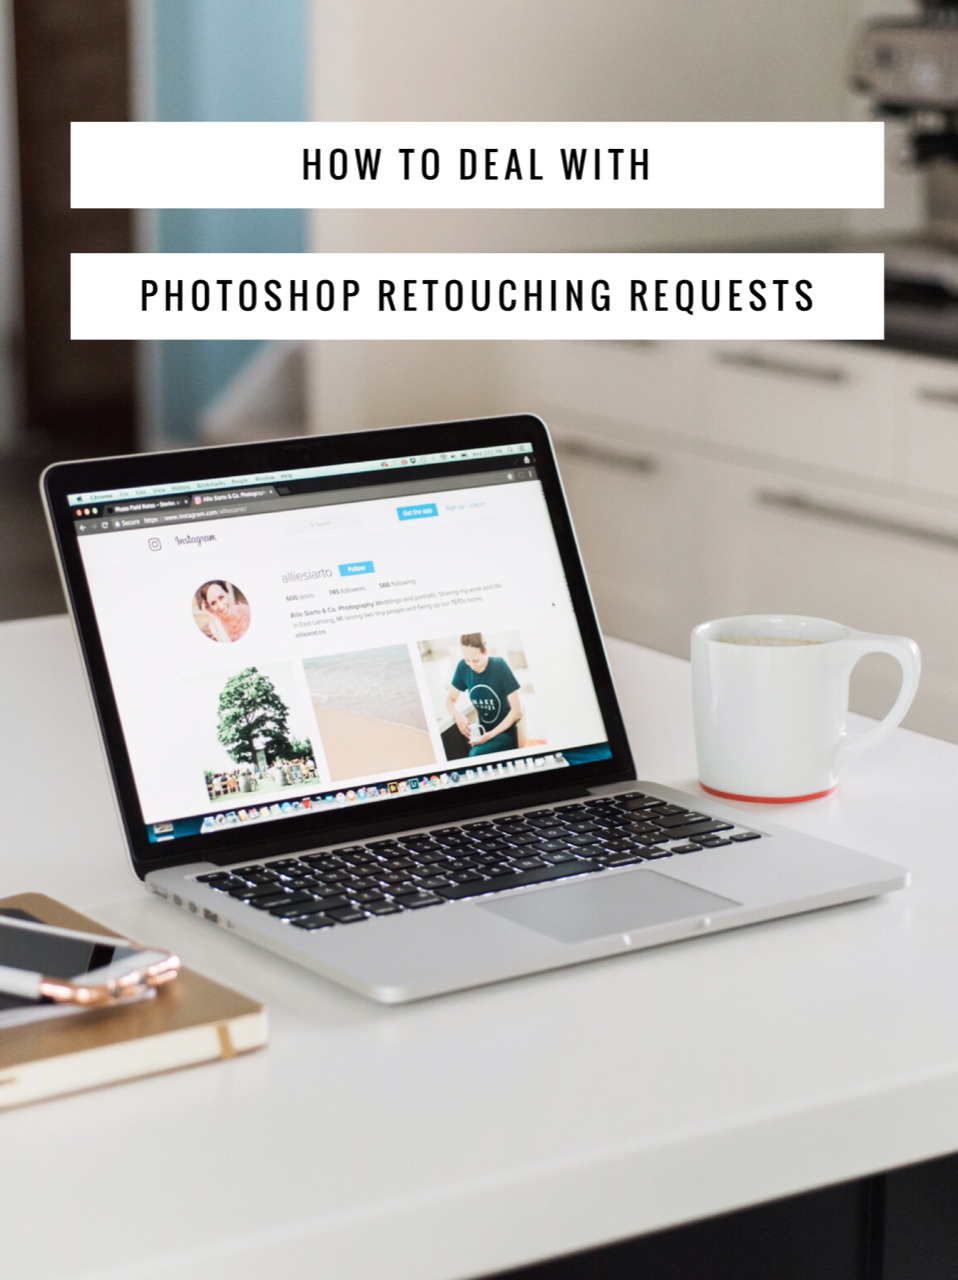 how to deal with retouching requests as a photograhper